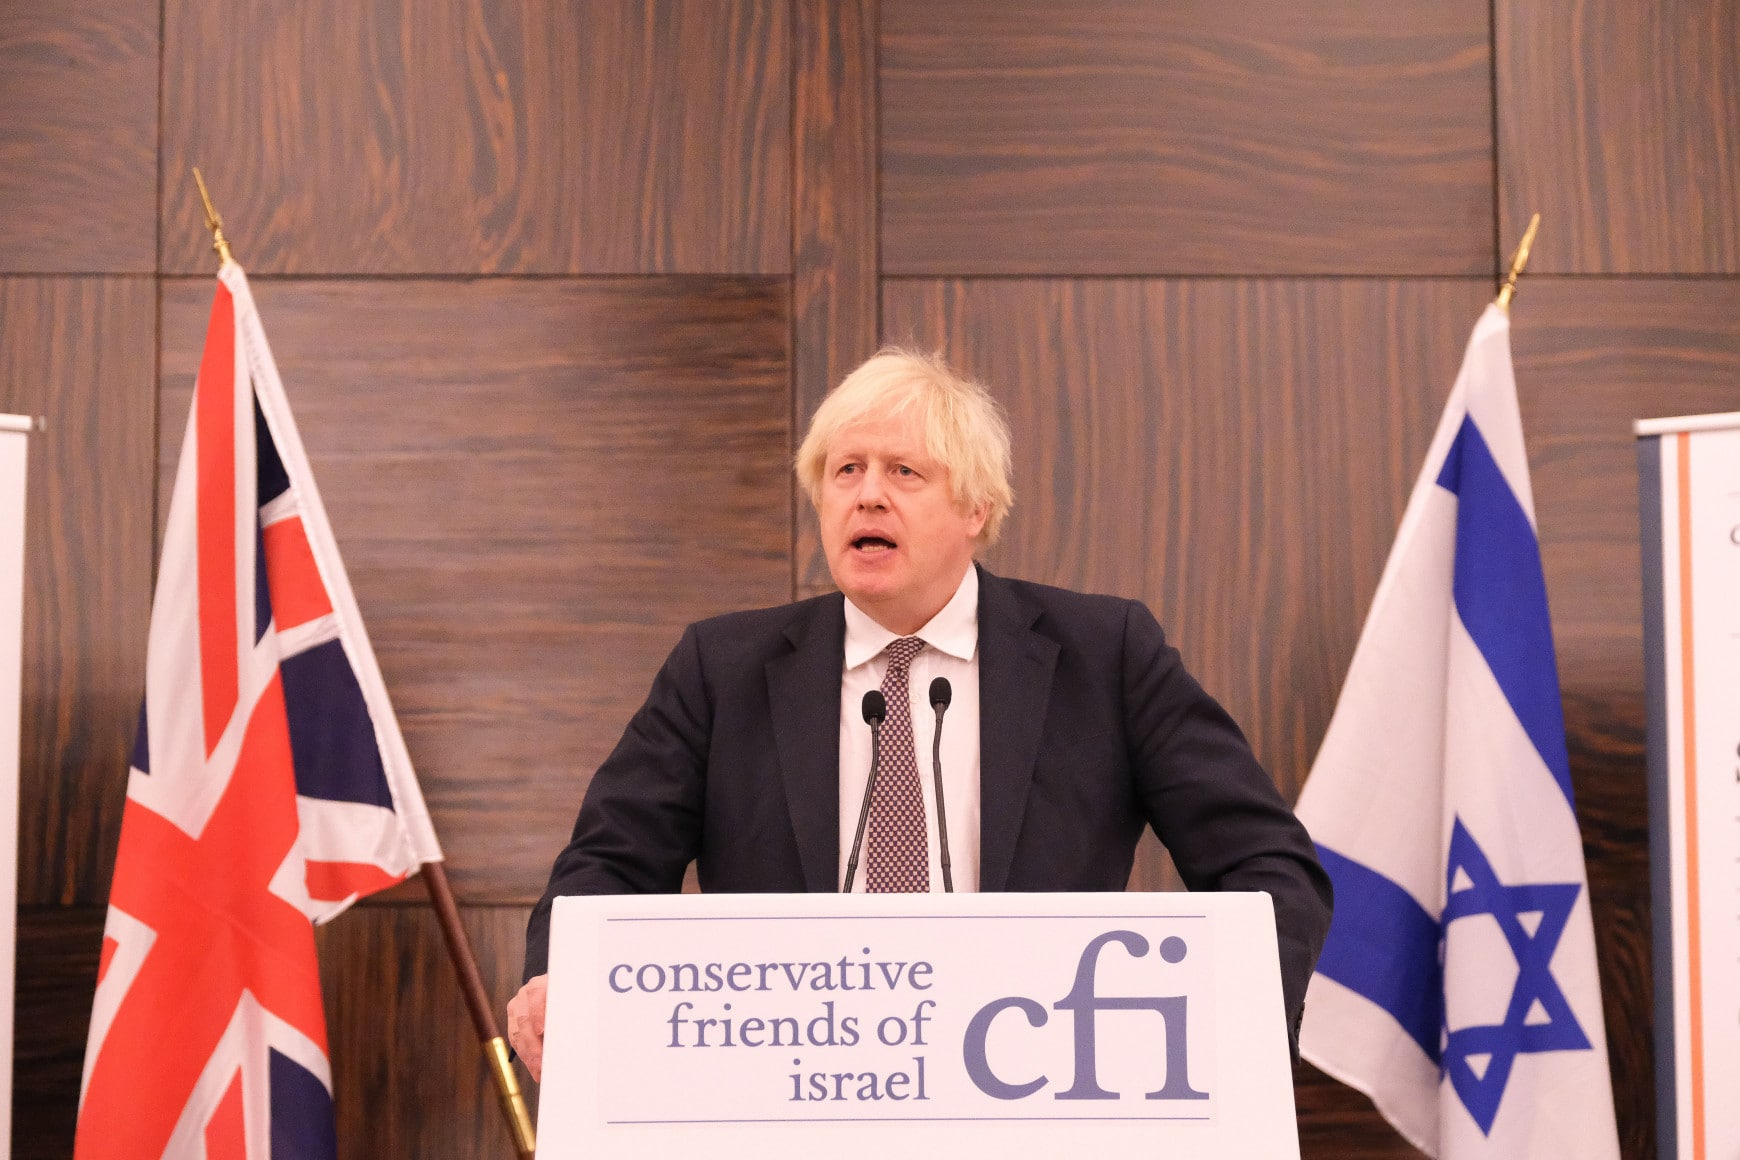 Prime Minister Boris Johnson and Israeli Foreign Minister Yair Lapid celebrate UK-Israel friendship at CFI Annual Business Lunch